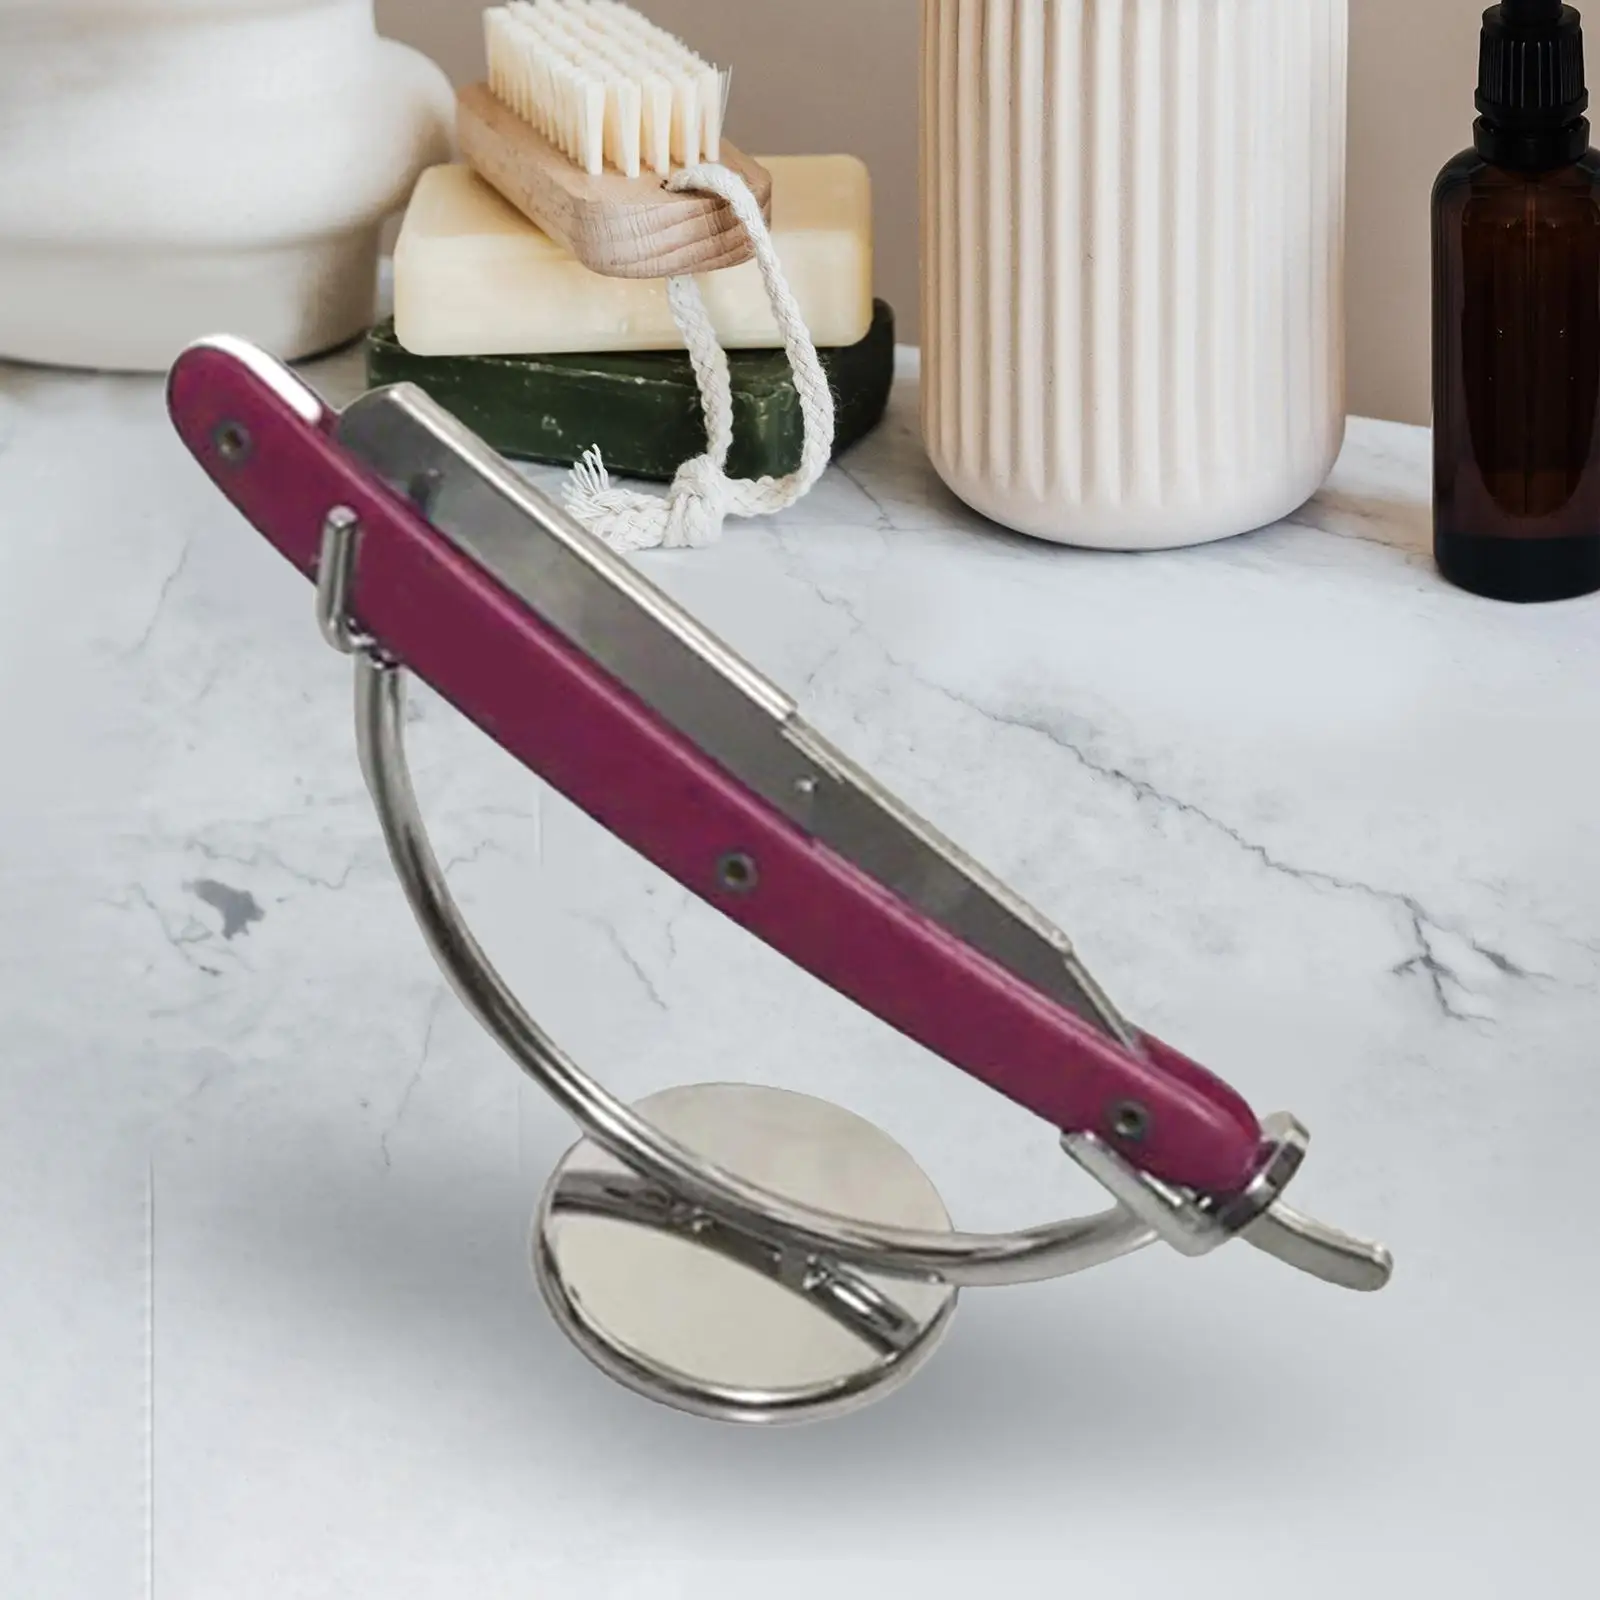 Straight Razor Stand Curved Stand Shaving Stand for Wet Shaving Enthusiastic Husband Boyfriend Height 8.7cm/3.4inch Accessory